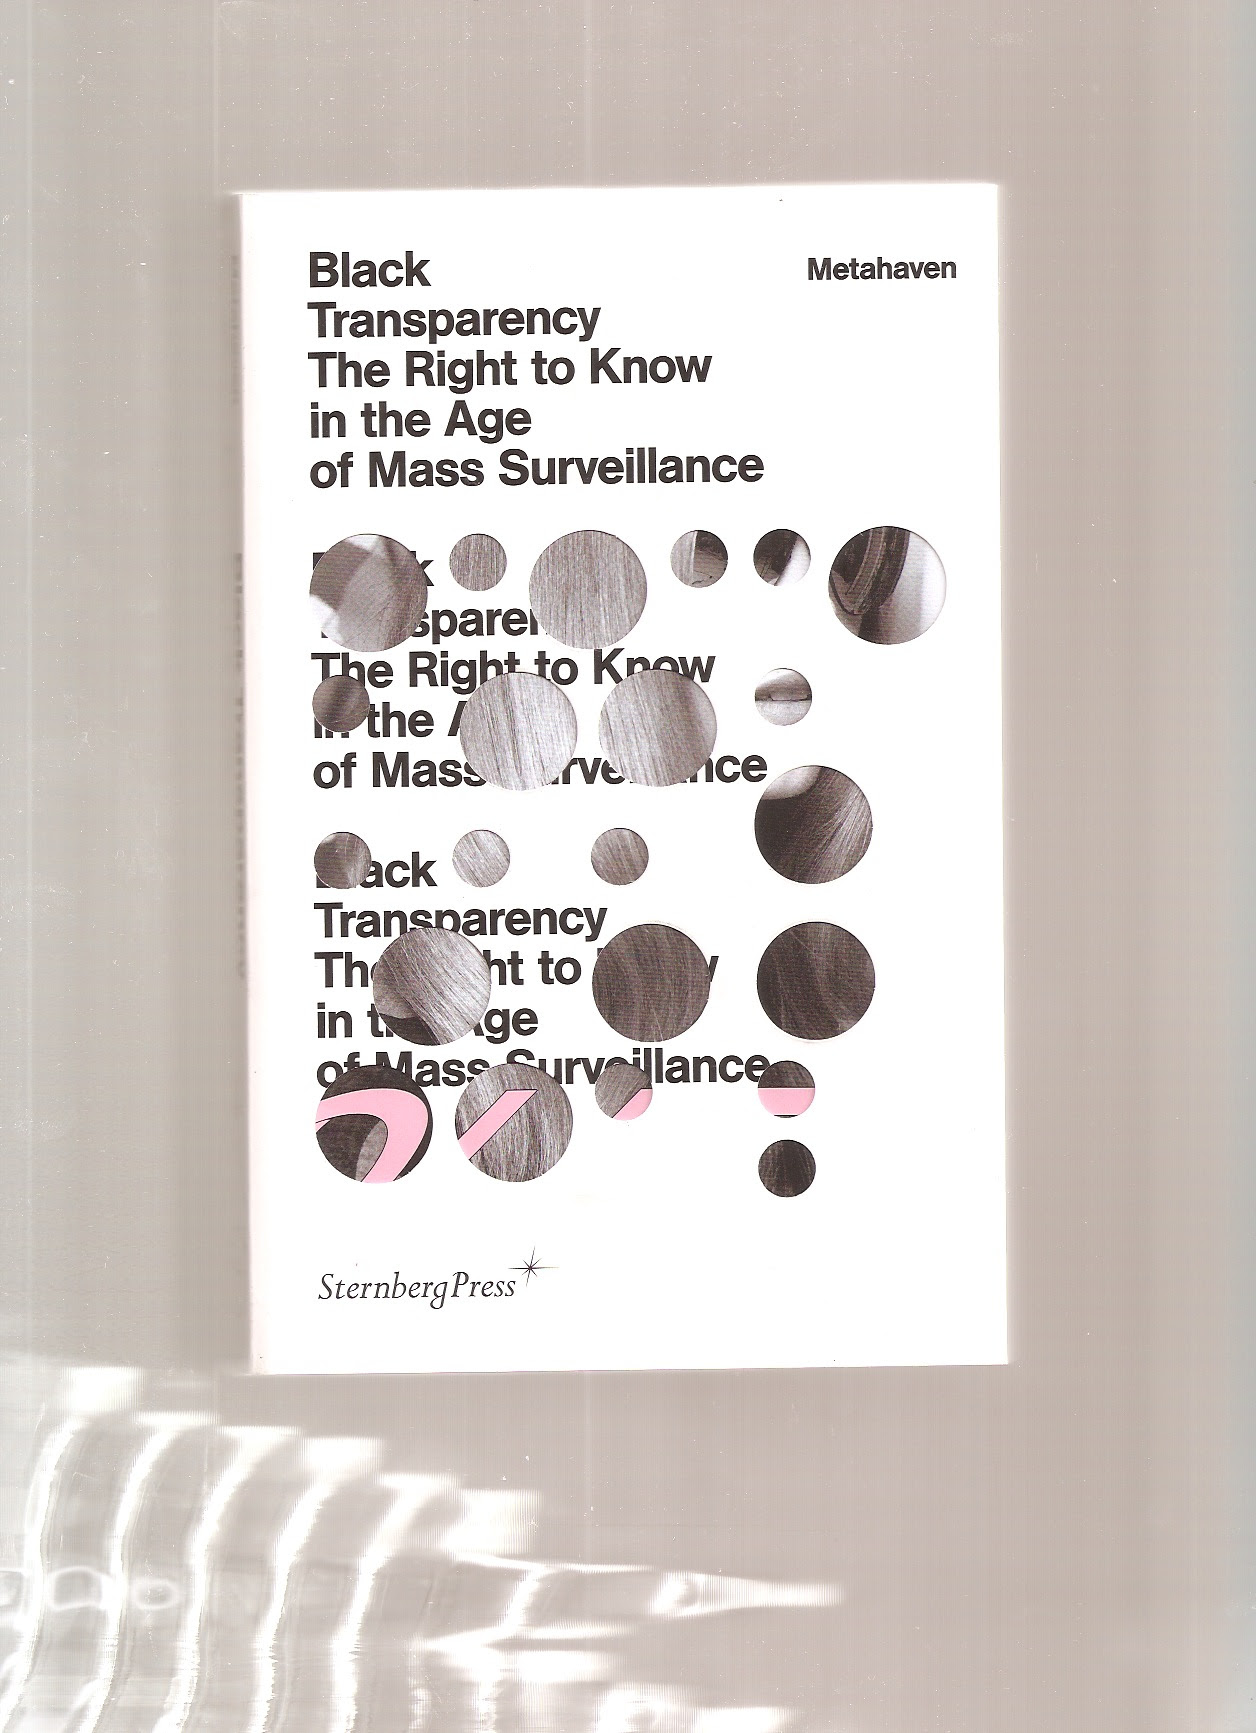 METAHAVEN - Black Transparency. The Right to Know in the Age of Mass Surveillance